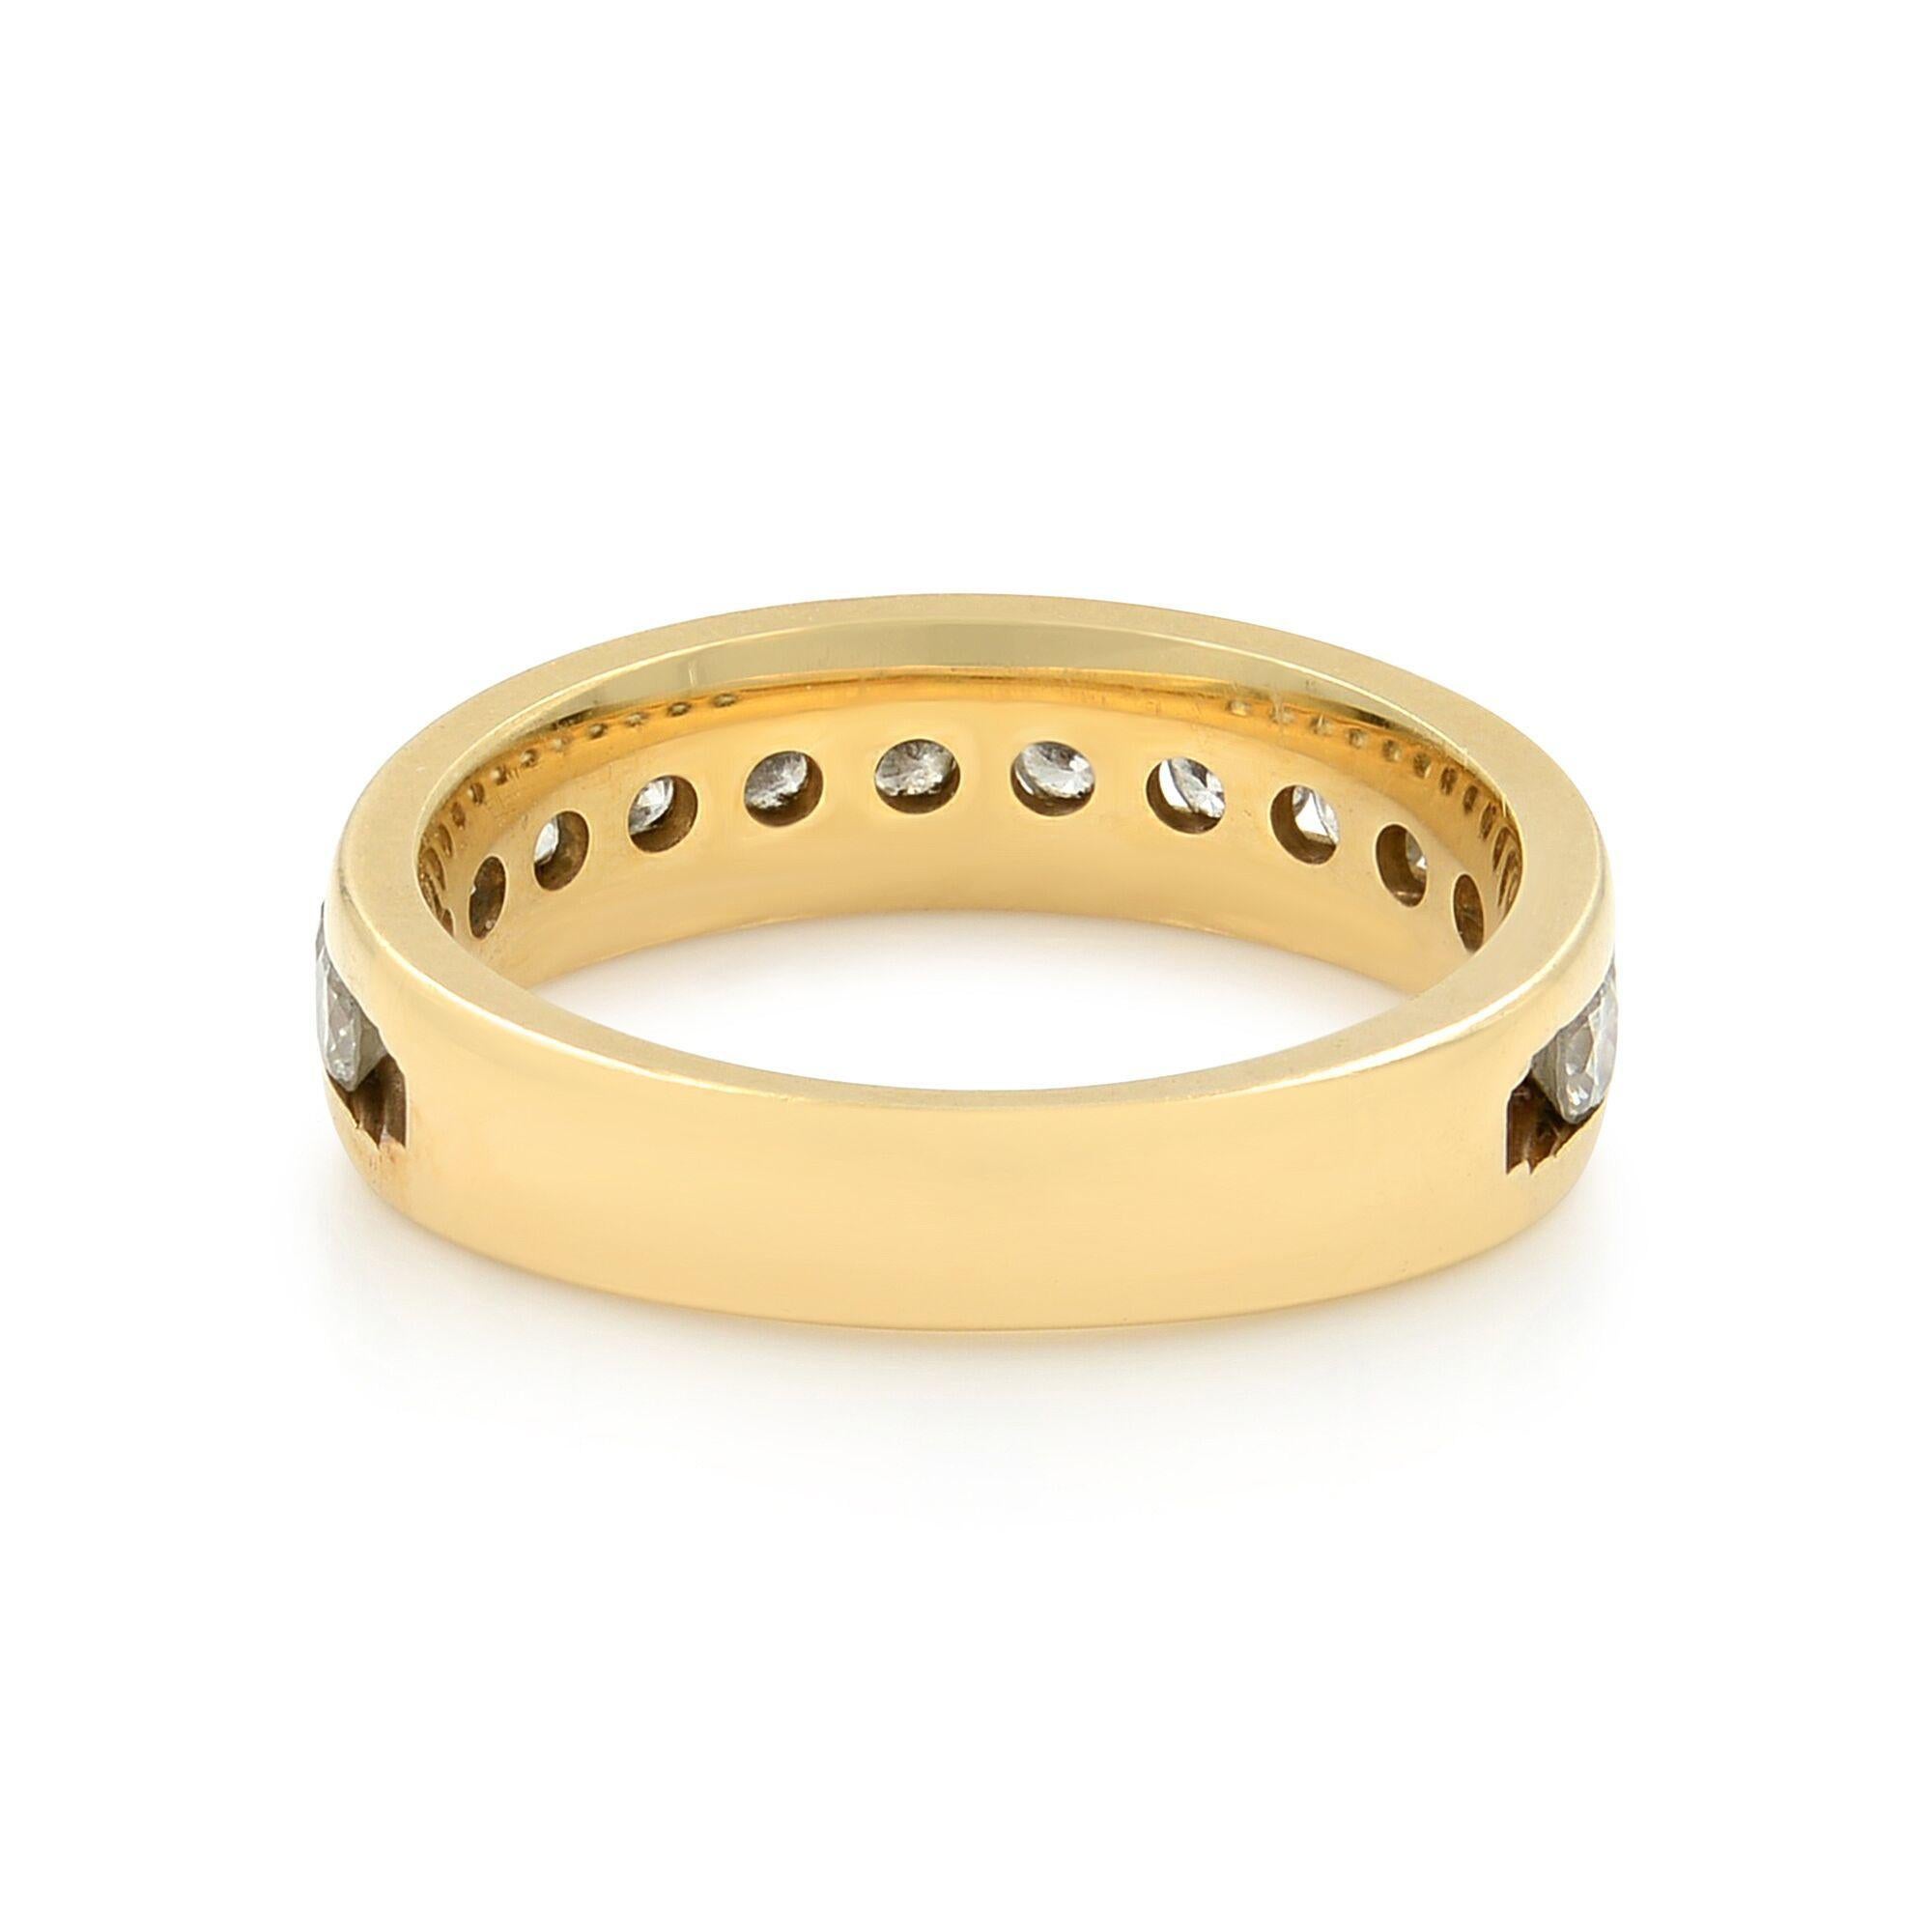 Rachel Koen Round Cut Diamond Wedding Ring Band 14K Yellow Gold 0.56Cttw In New Condition For Sale In New York, NY